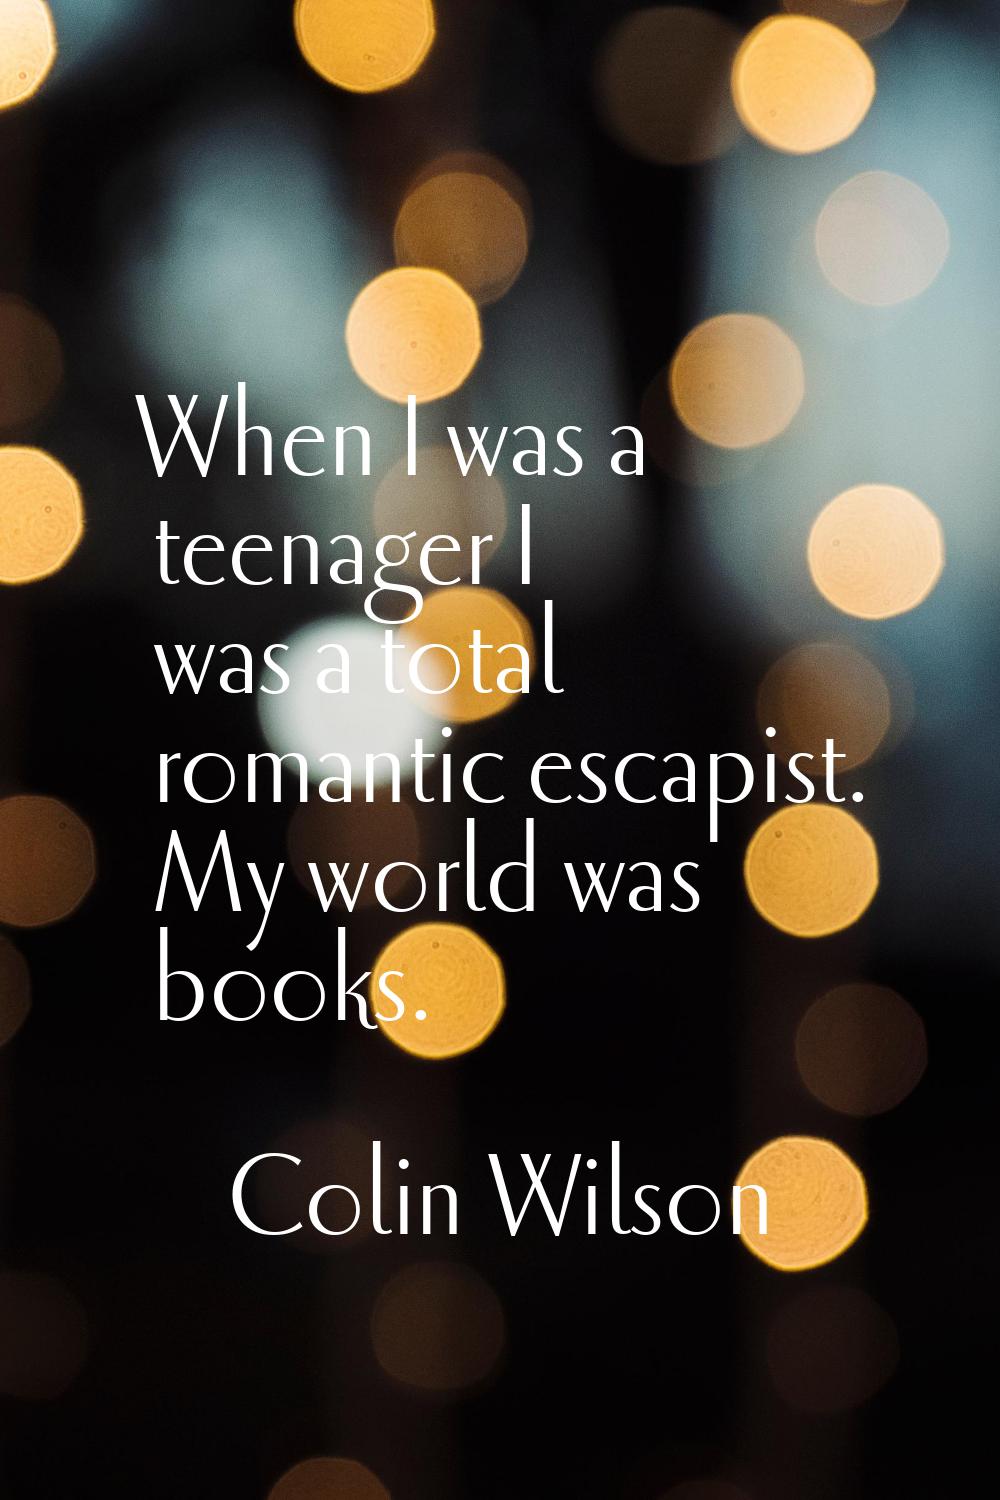 When I was a teenager I was a total romantic escapist. My world was books.